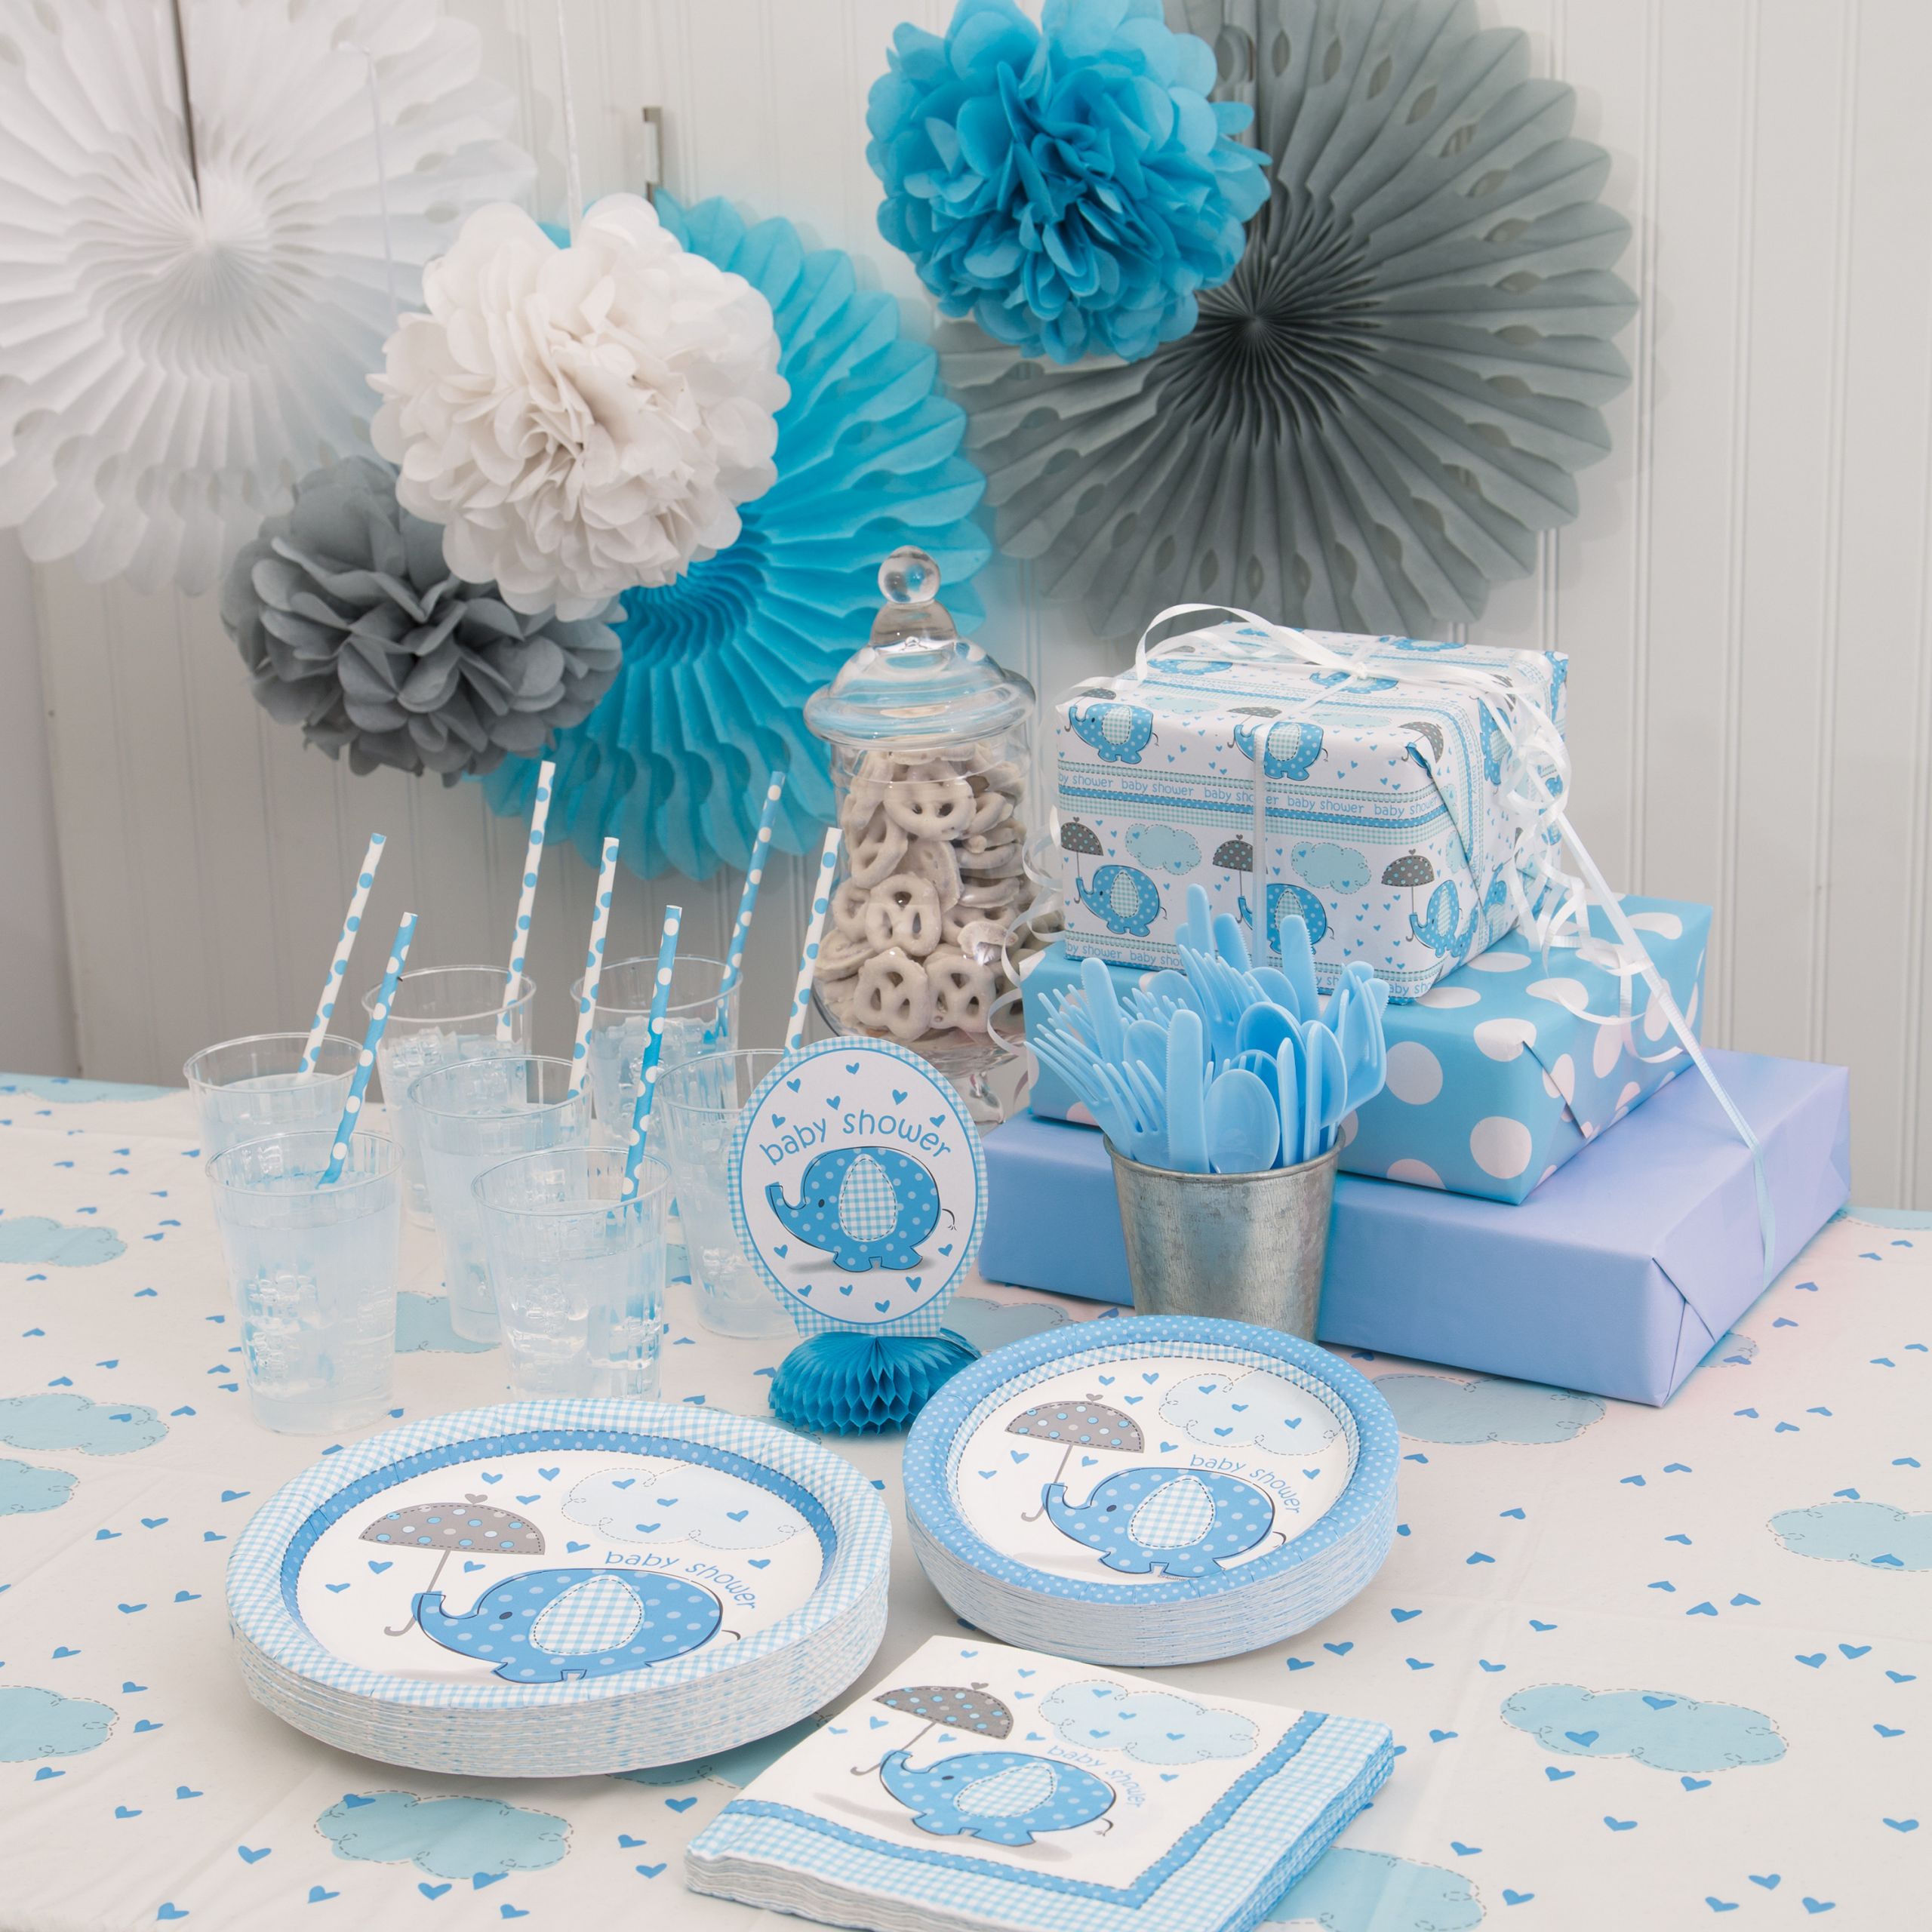 Party City Elephant Baby Shower
 Blue Elephants Baby Shower Supplies Walmart